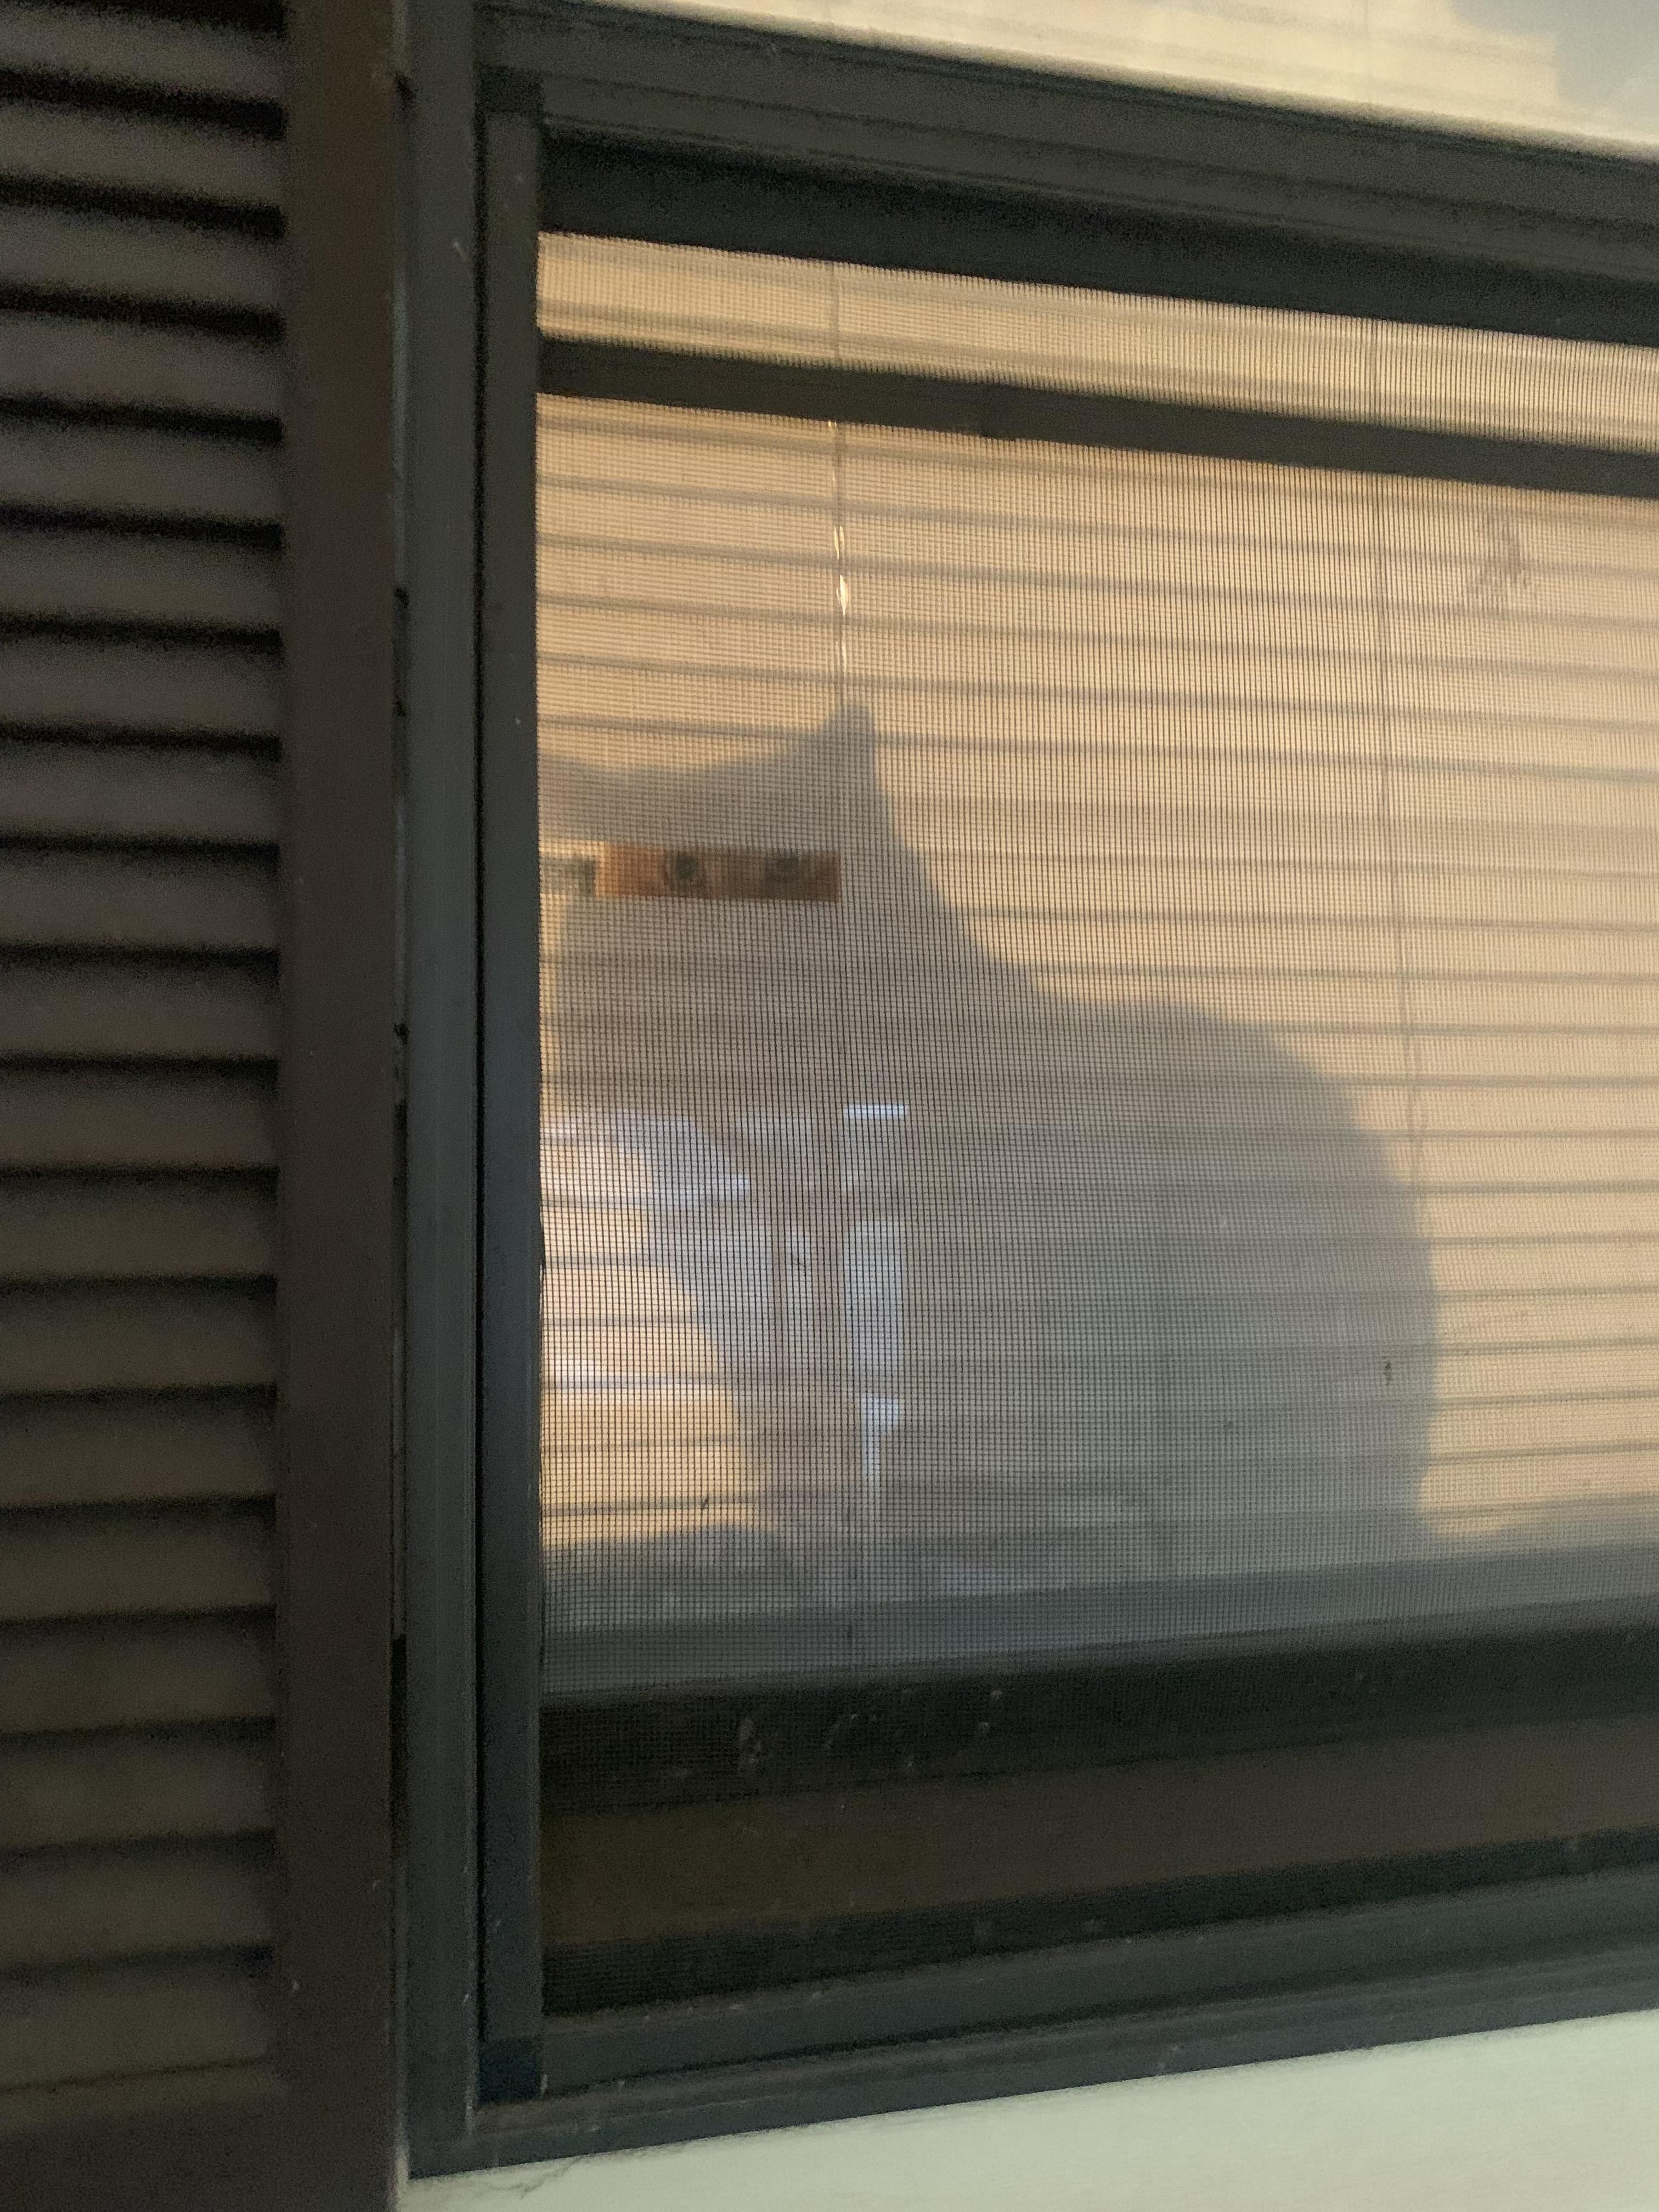 My cat messed up a single part of my window shades.. never realized why until just now.